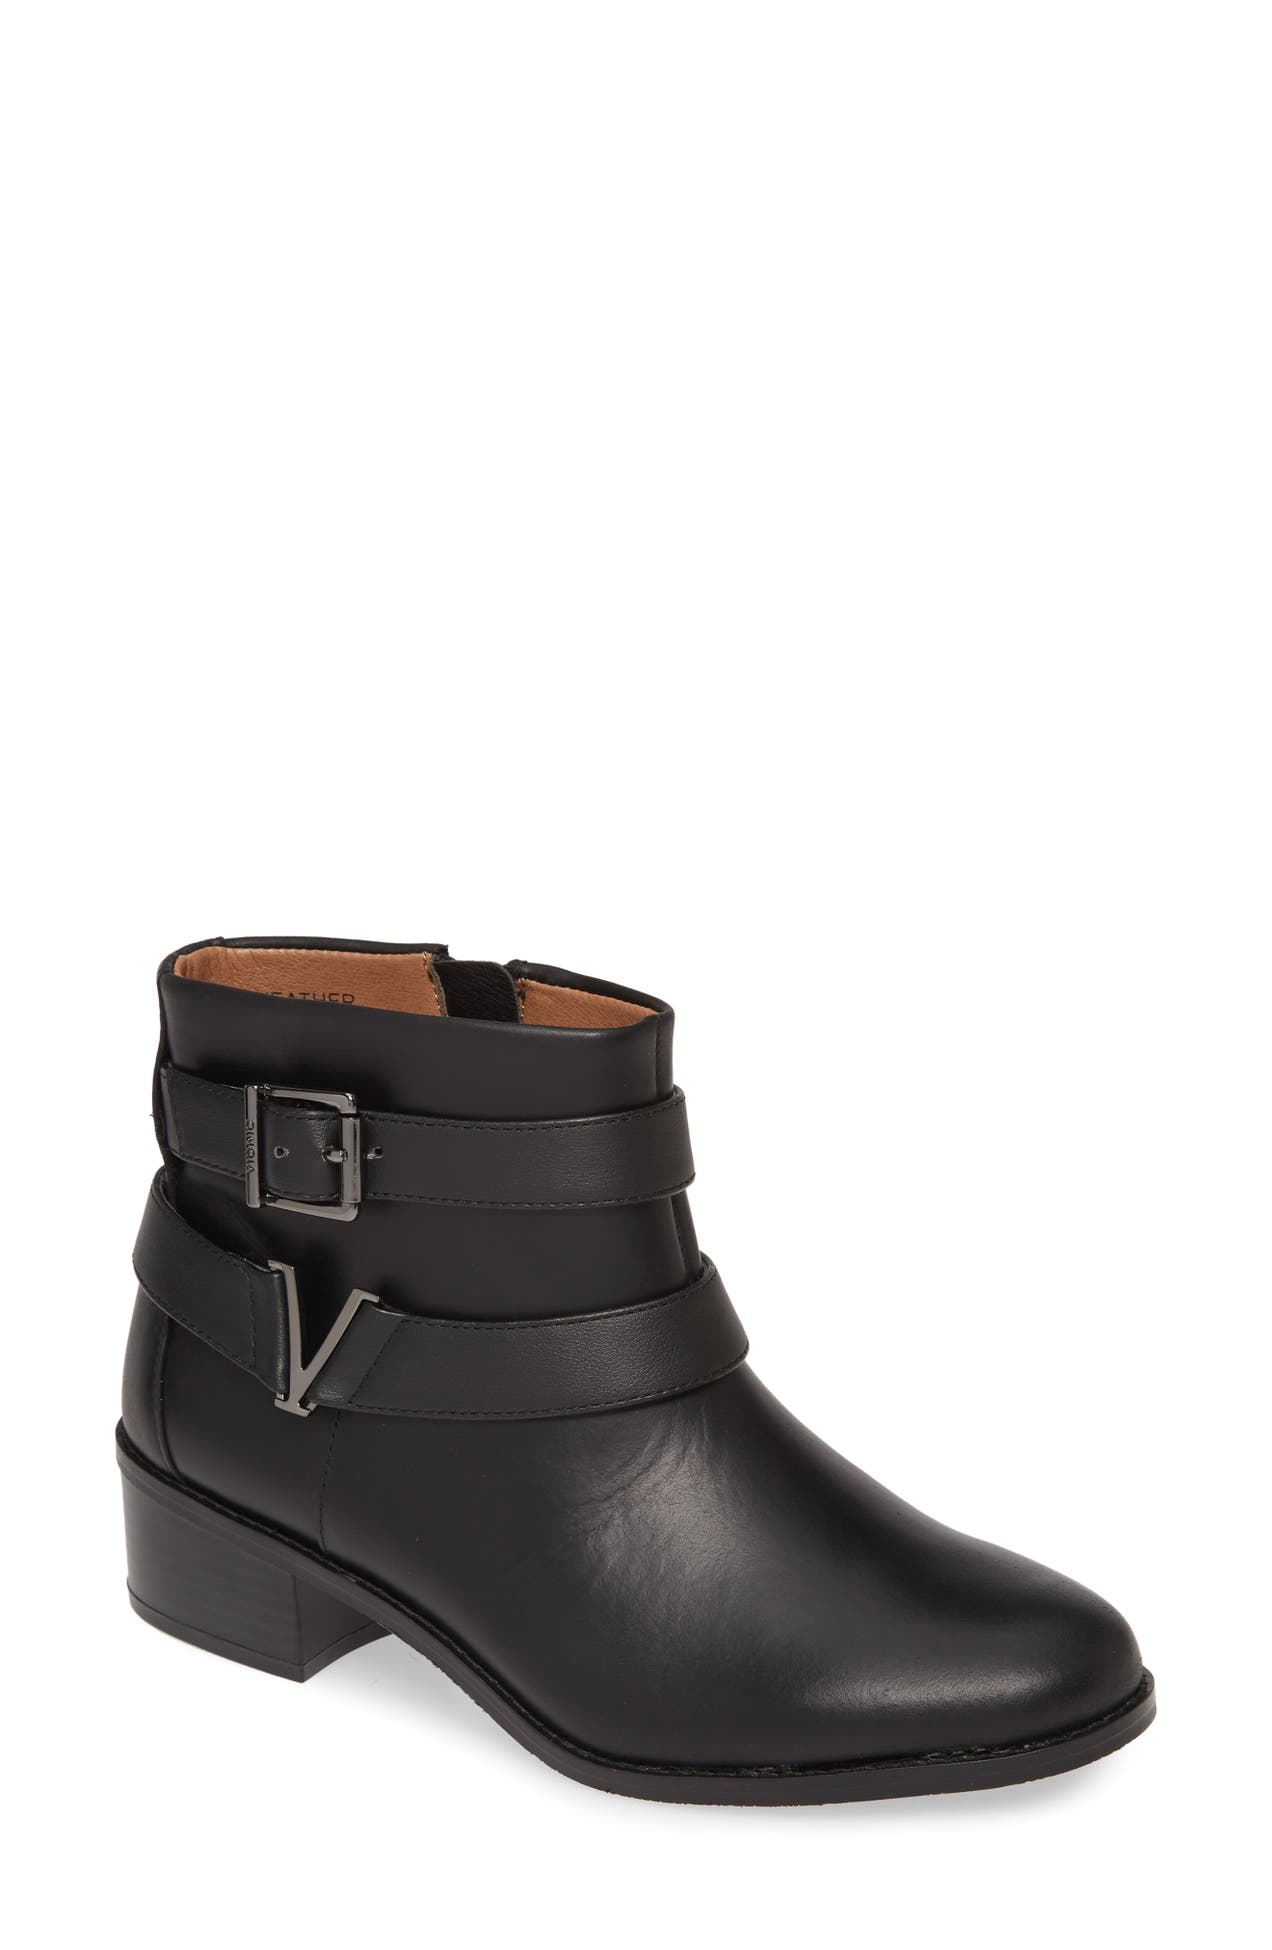 Vionic | Mana Leather Ankle Boot - Wide Width Available | Nordstrom Rack